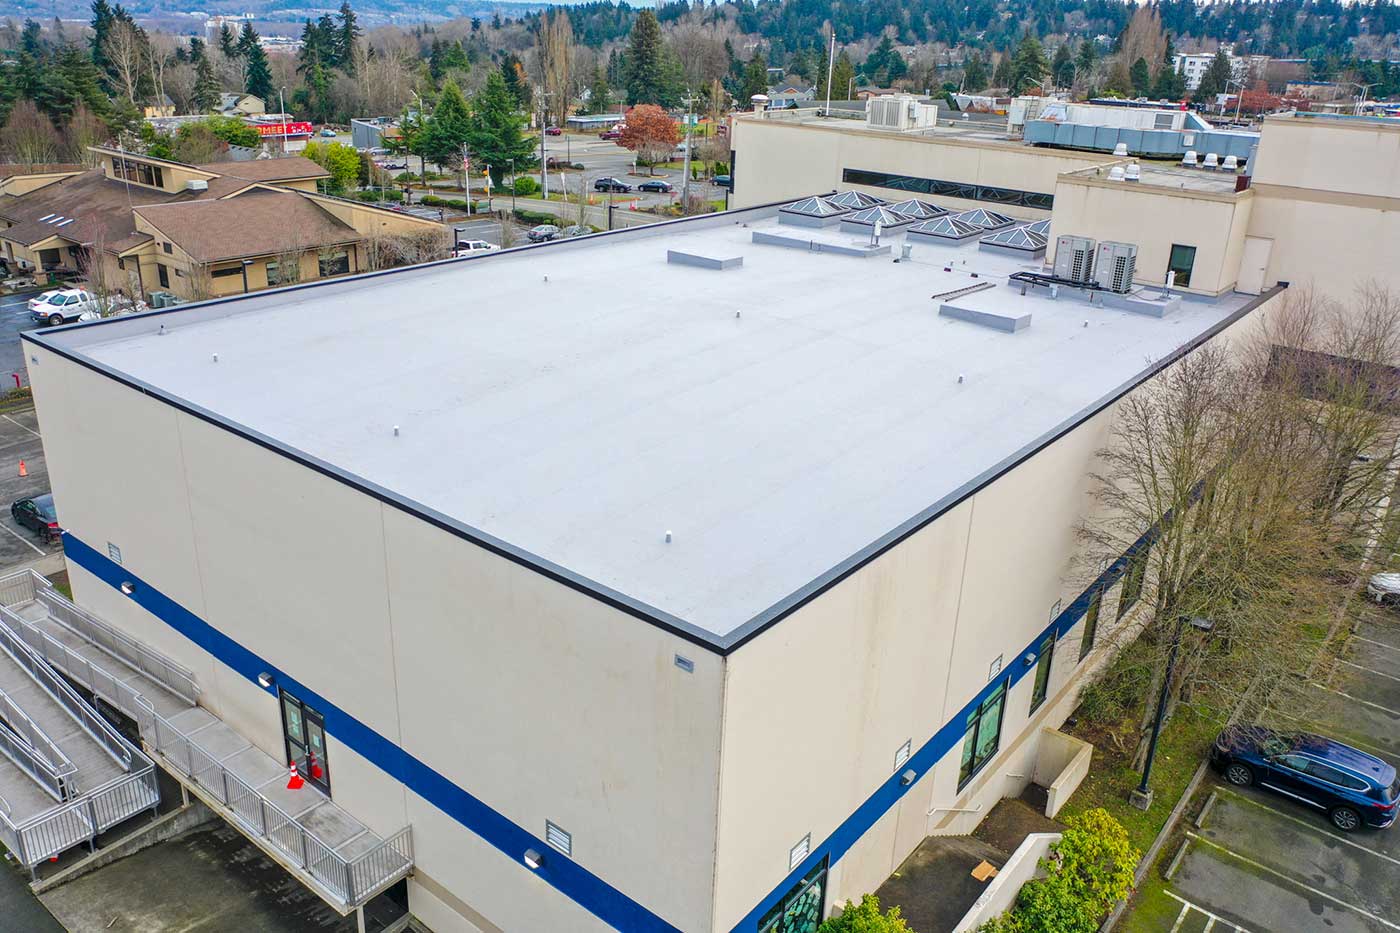 Puget Sound Elementary School Flat Roof in Tukwila, Washington - top view of flat roof from angle